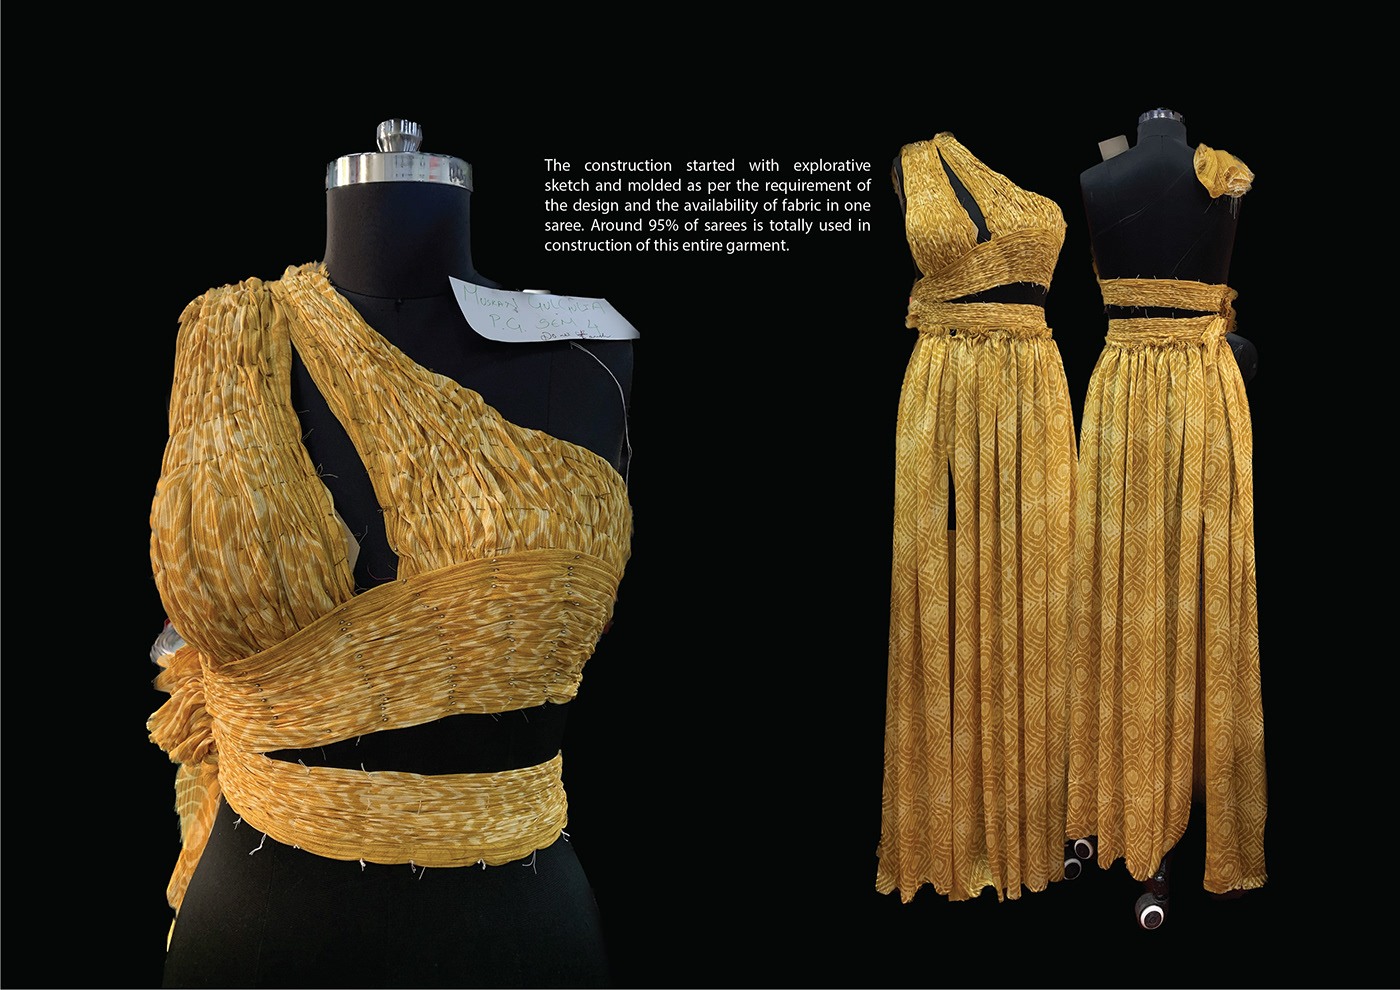 upcycling Pleating draping couture Sustainable Design Sustainable Fashion zerowaste fashion design OLD SAREES